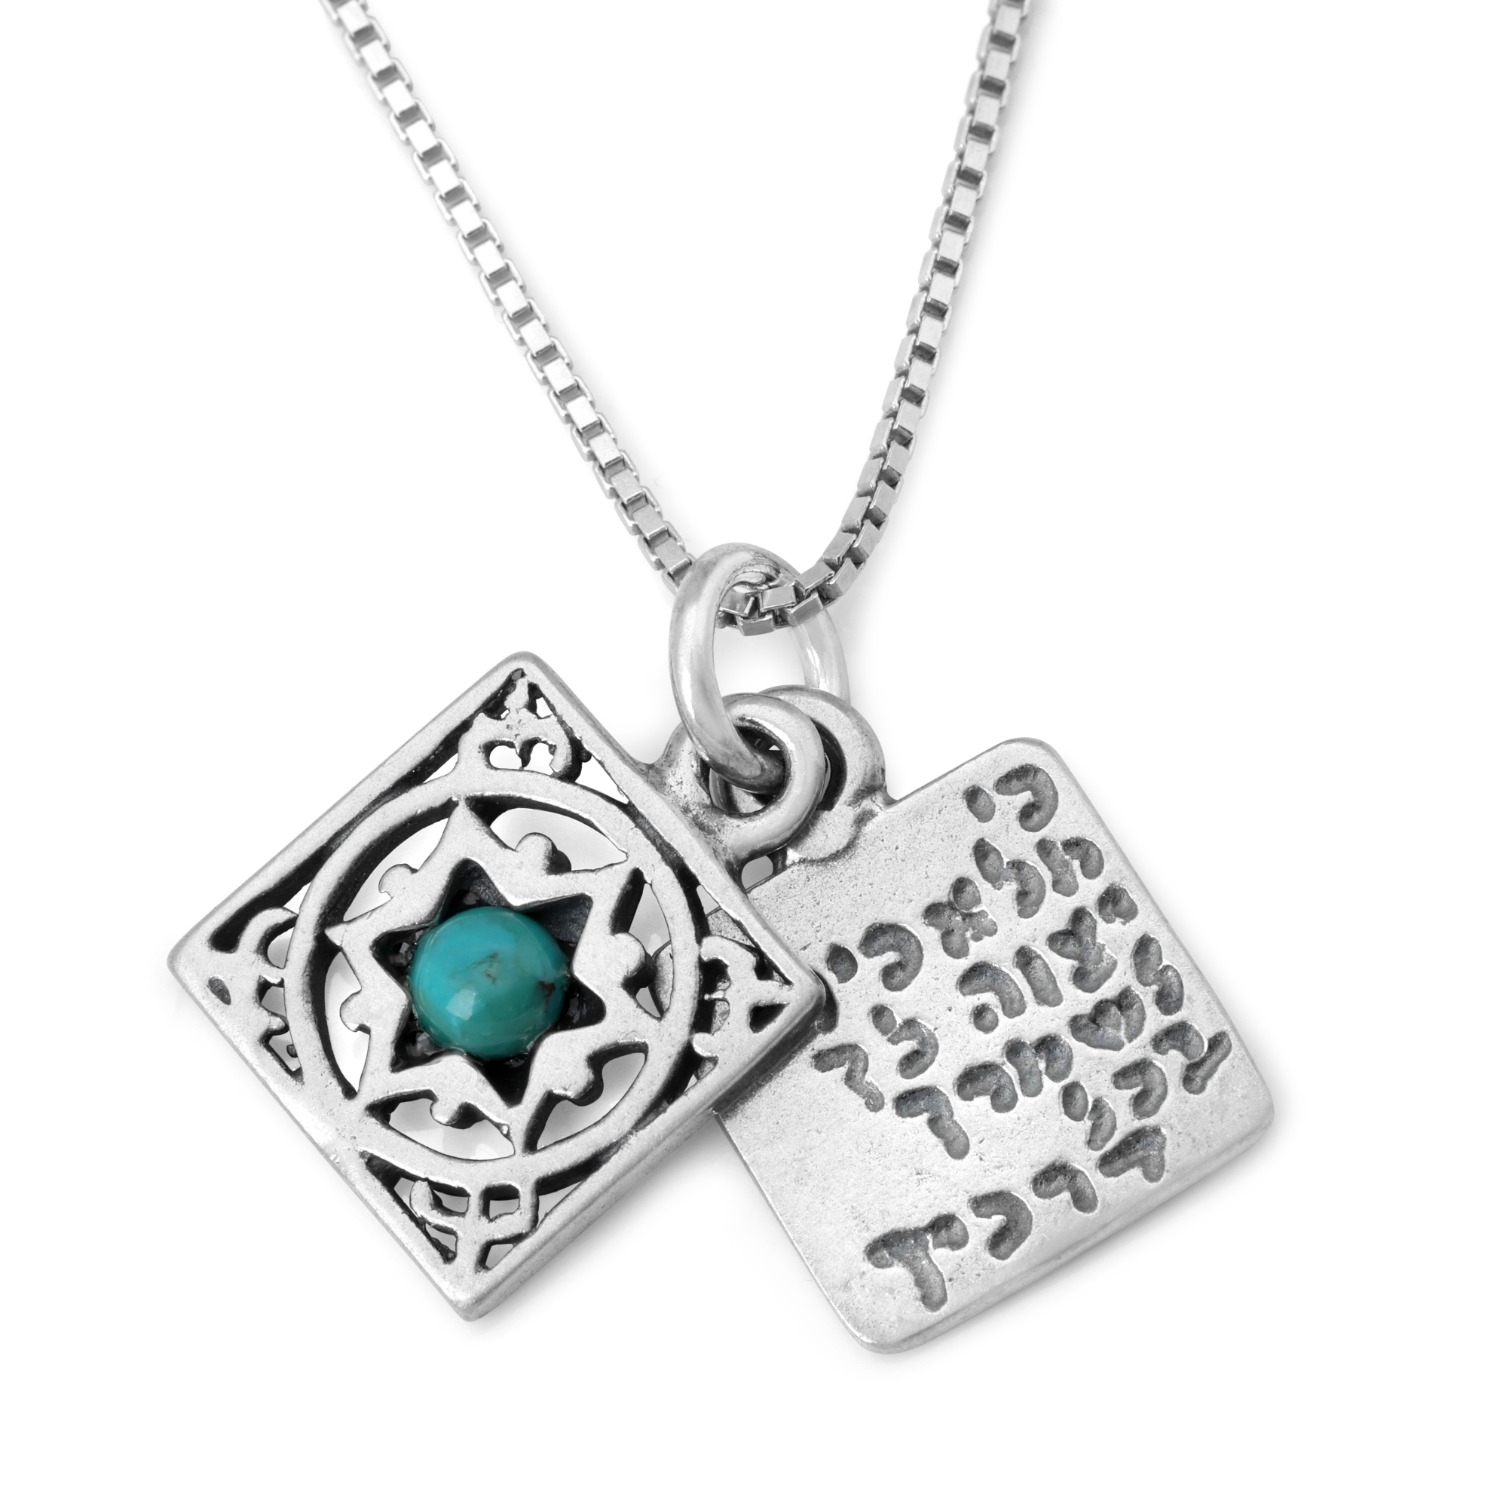 Traveler's Prayer: 925 Sterling Silver 2-Piece Pendant Necklace with Star of David - 1